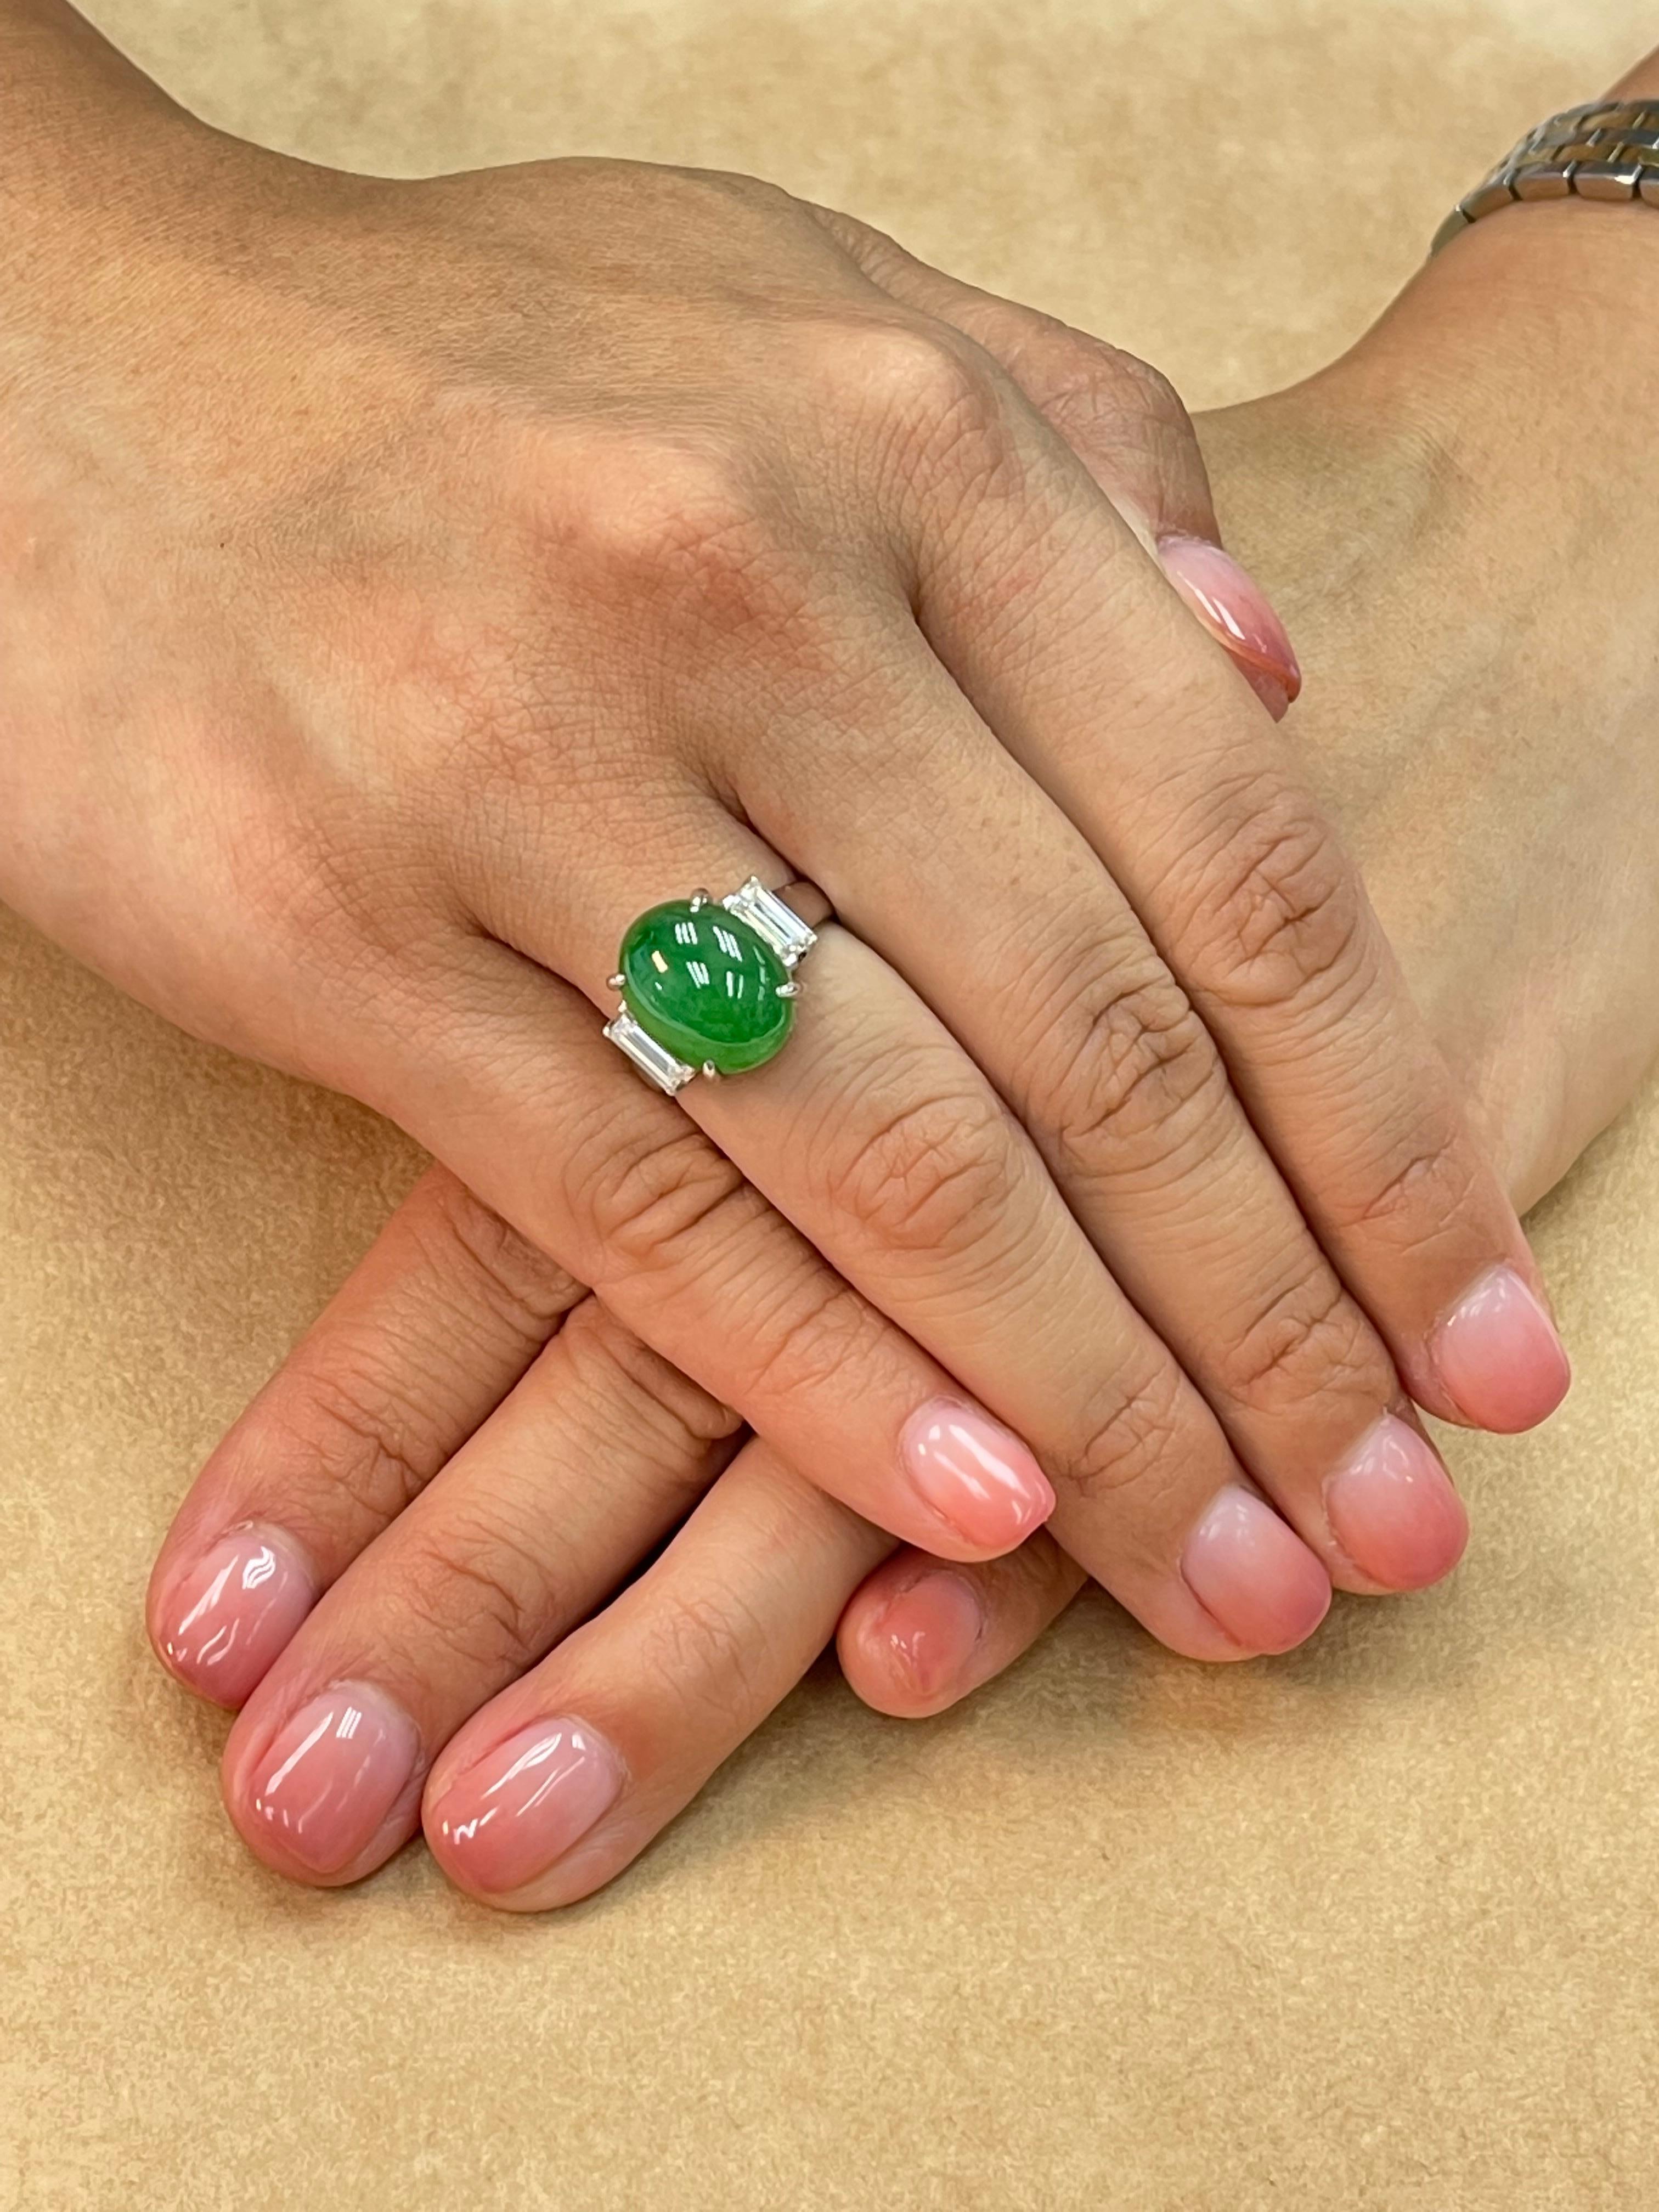 PLEASE CHECK OUT THE HD VIDEO! This jade is light apple green in color. It is a larger natural jade at just over 7 cts with a nice dome and not backed to show the true color. This is a simple 3 stone ring with a twist. On each side of the jade is a